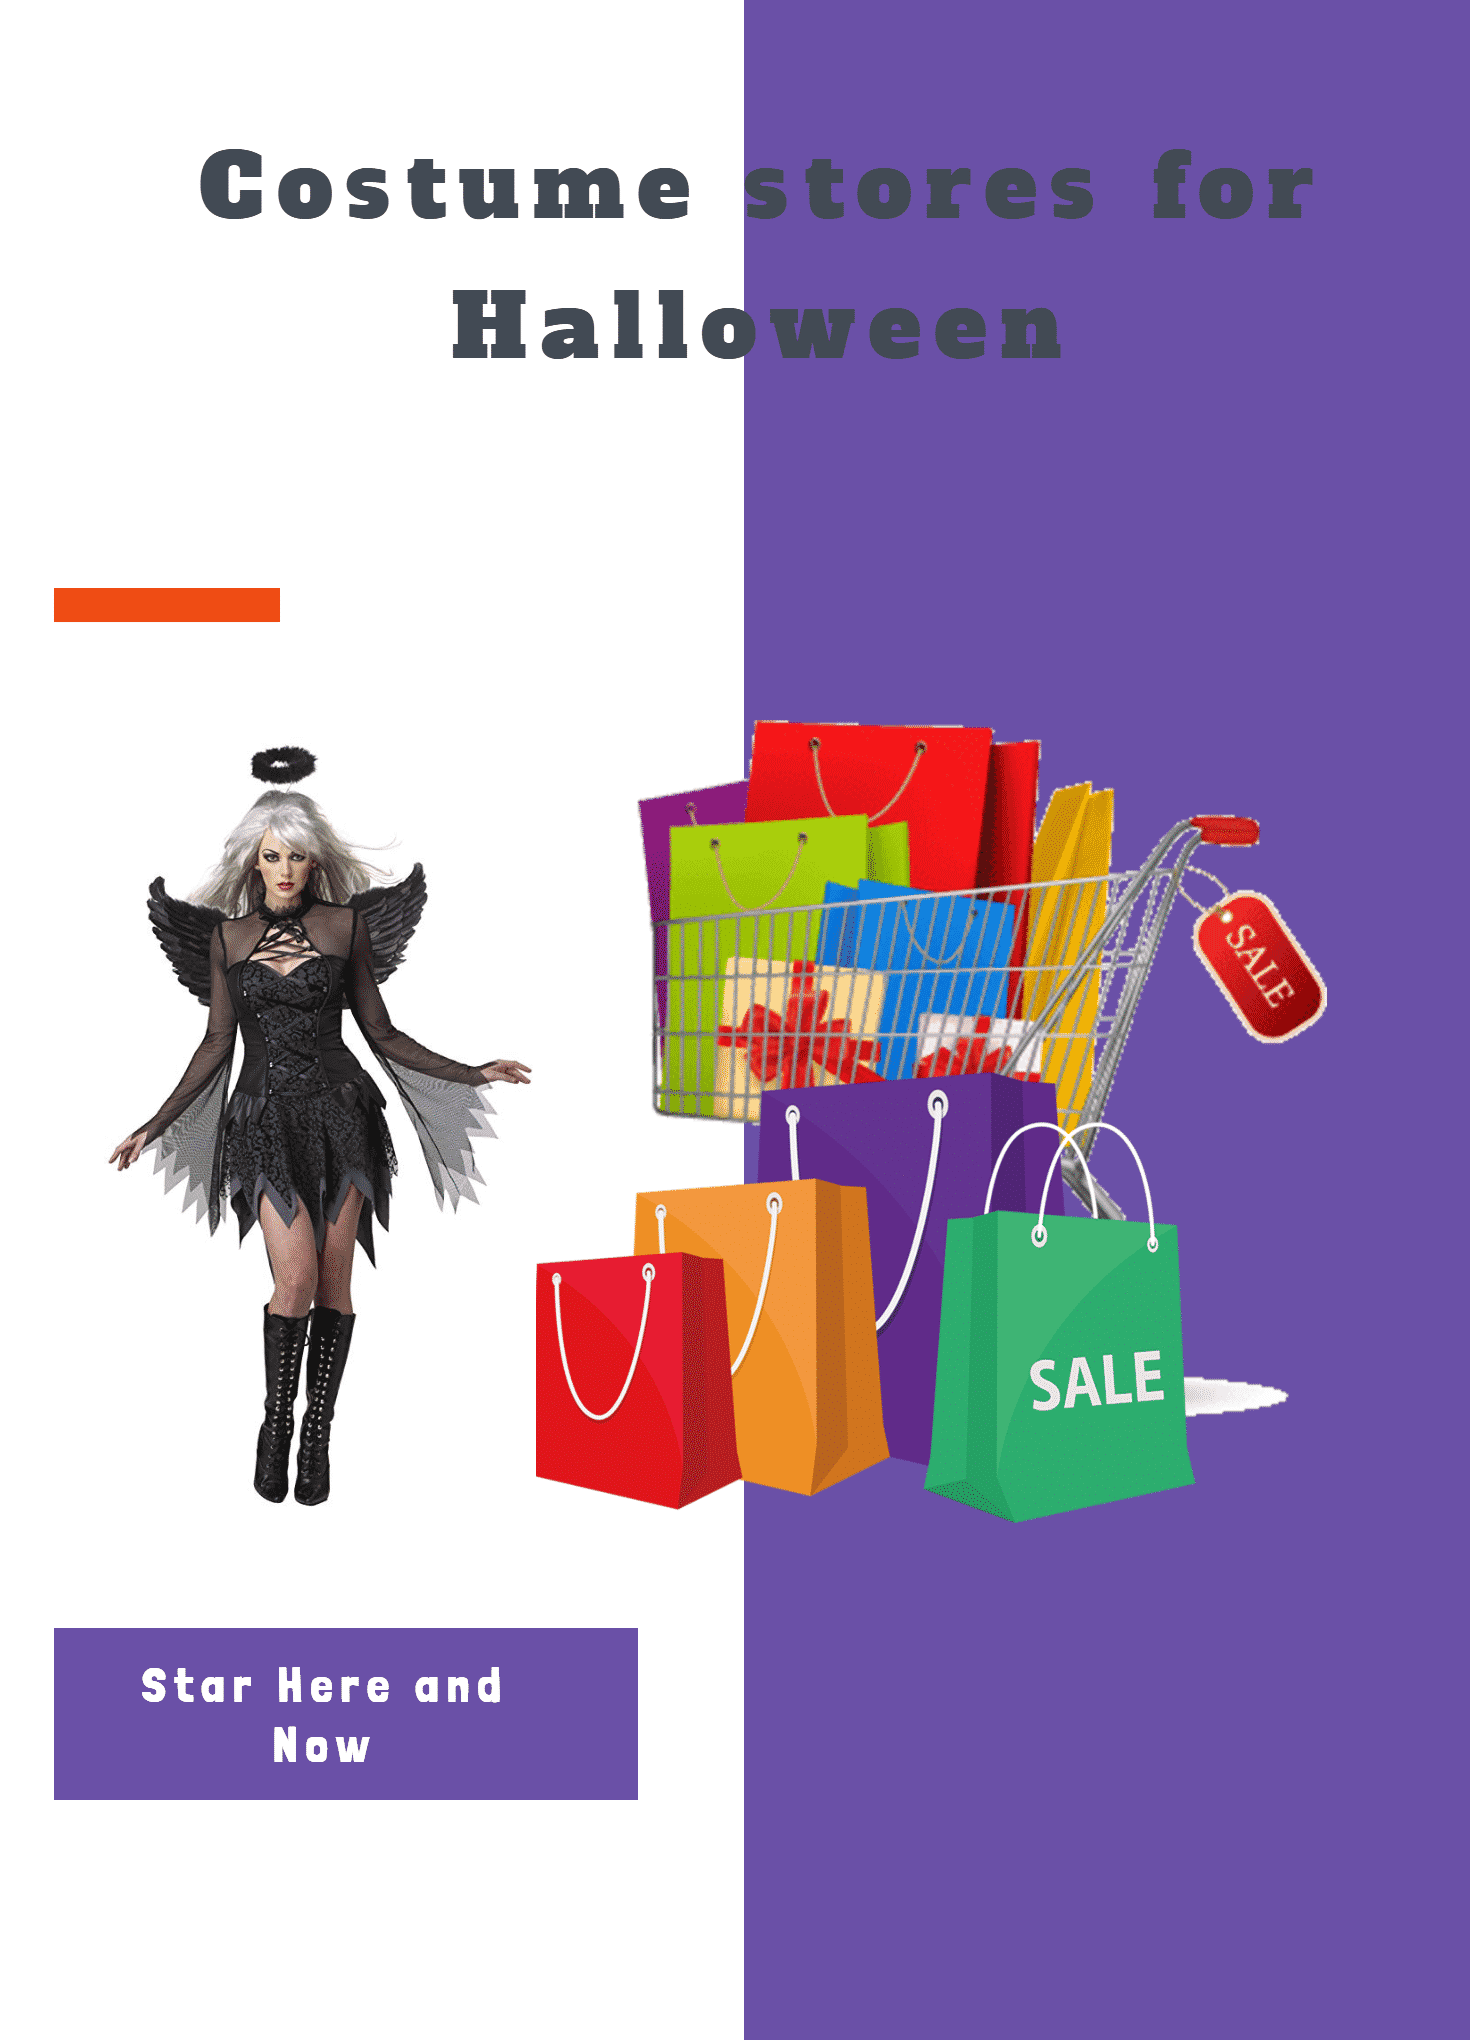 Costume stores for Halloween